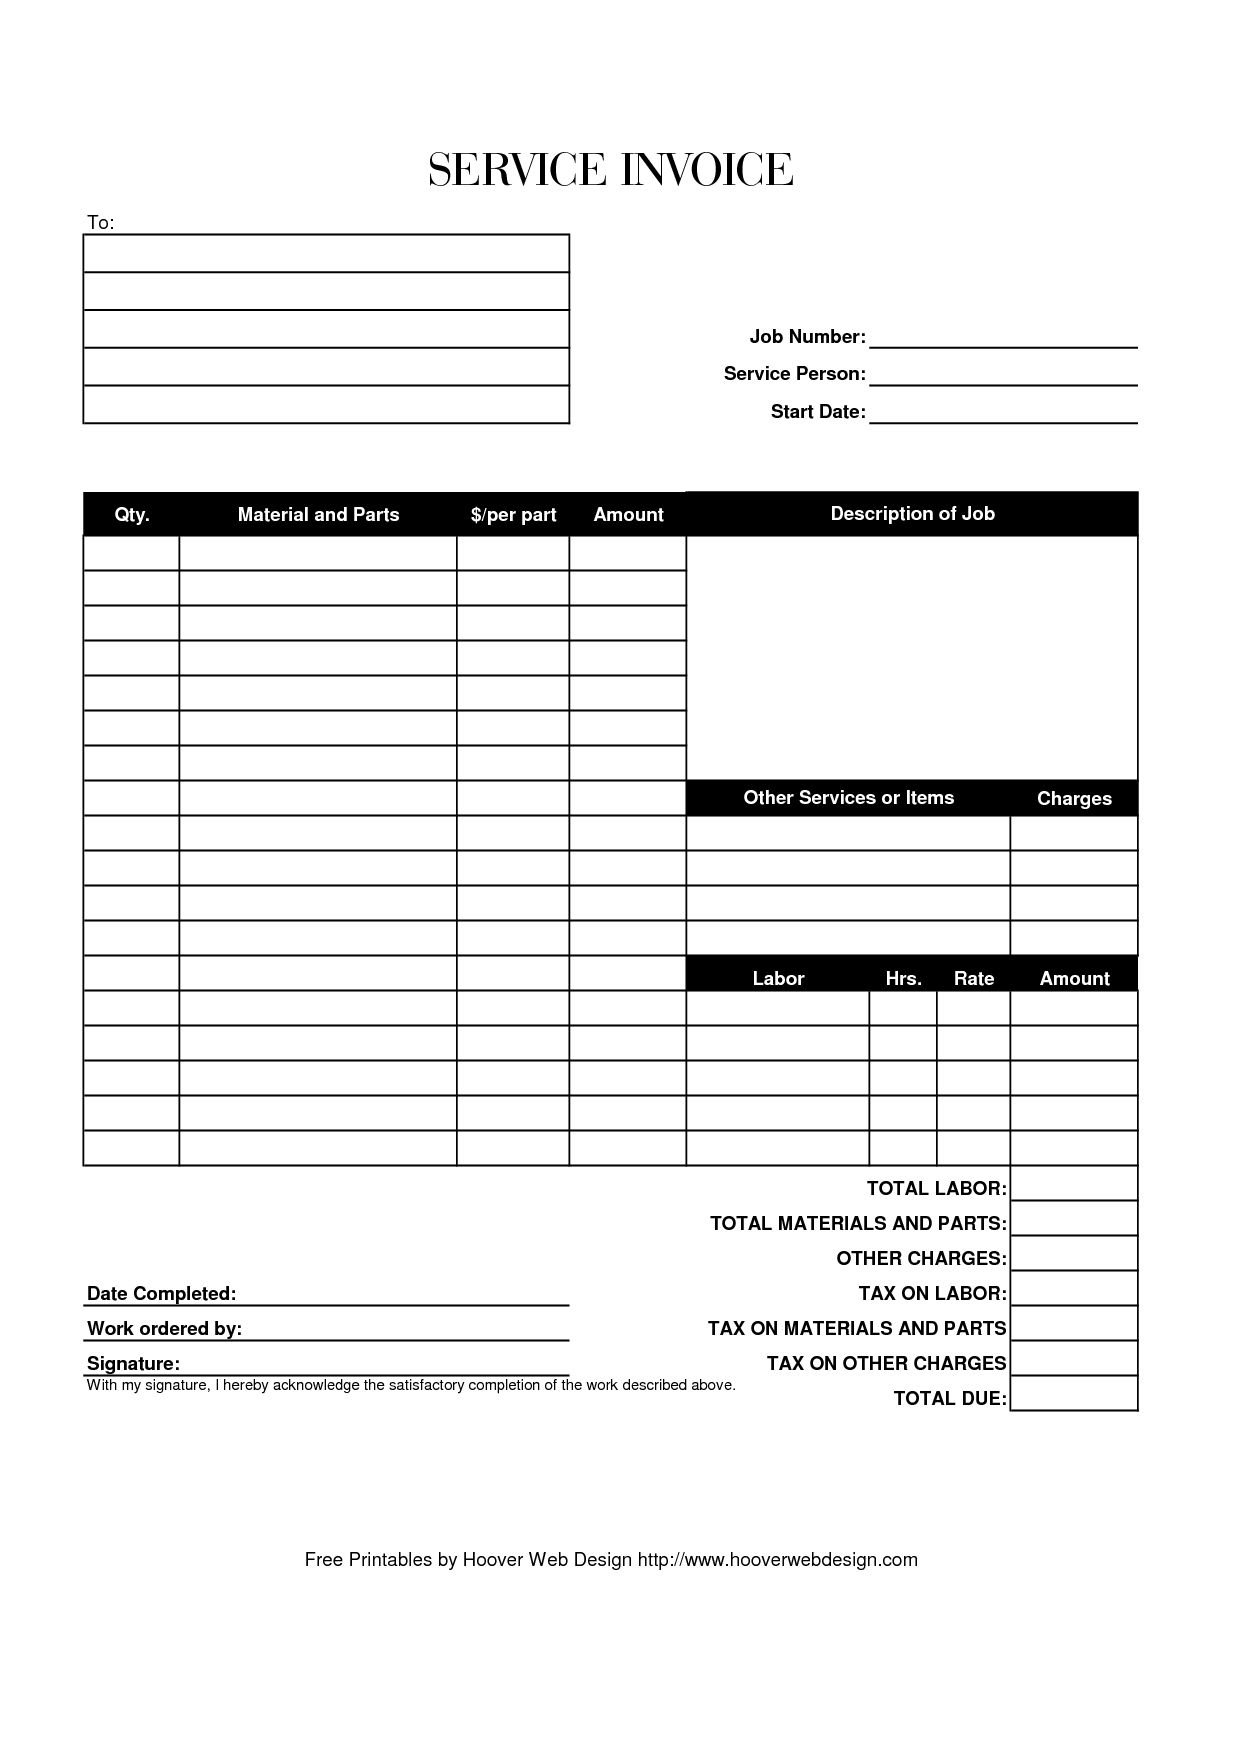 Free Printable Invoice Template 10 Printable Invoice Templates And